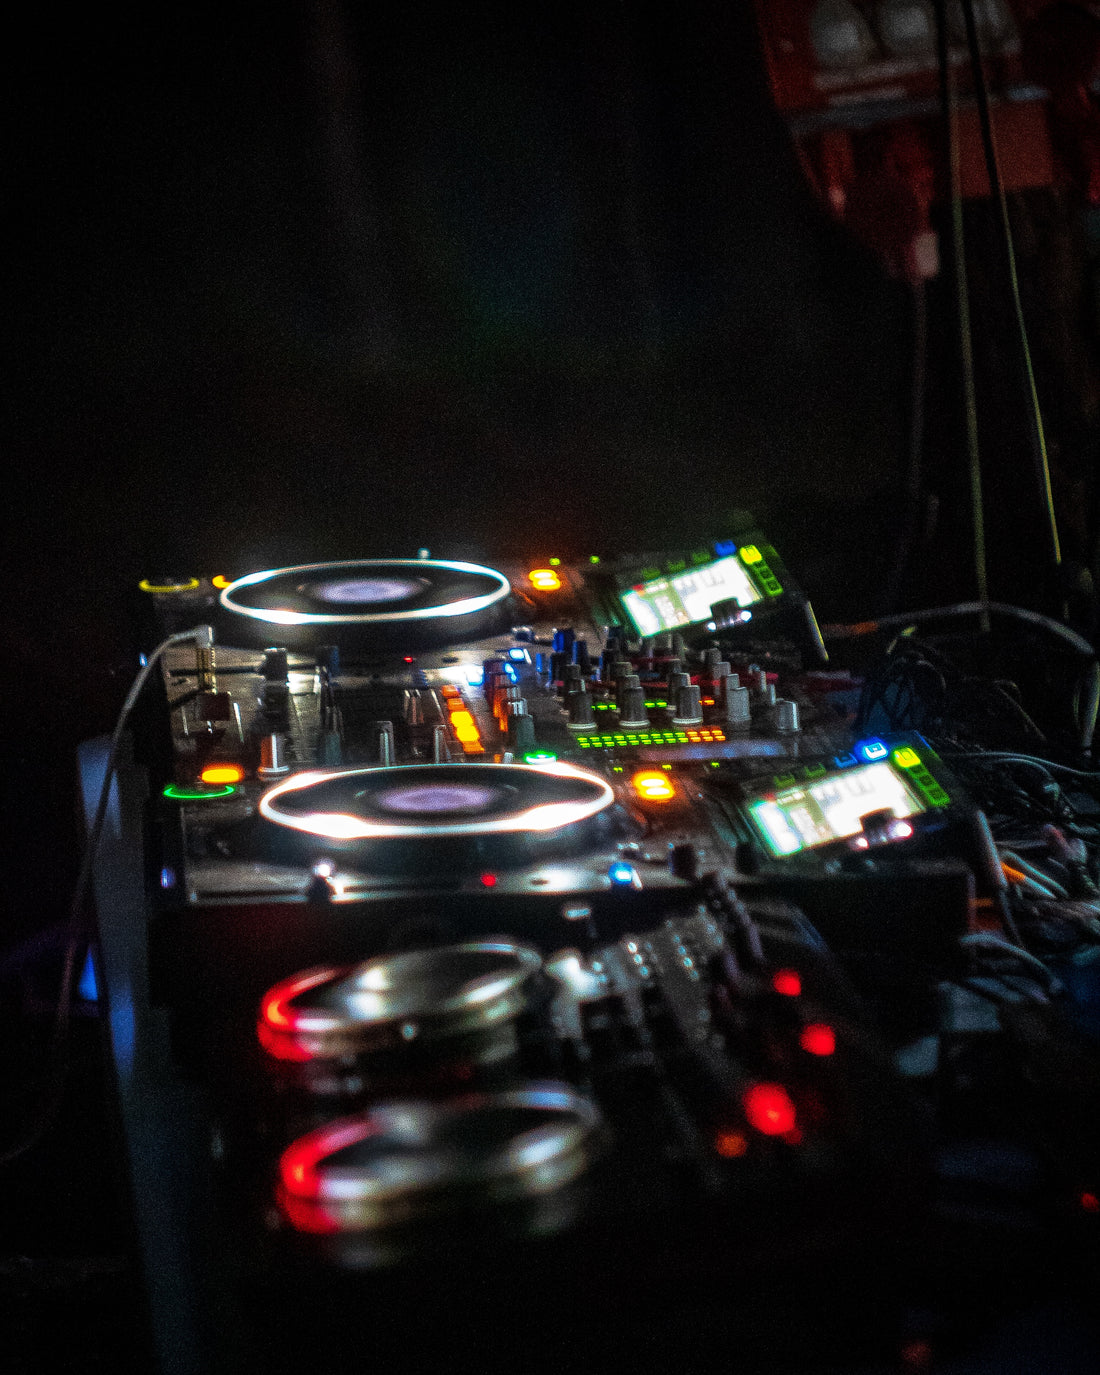 How to Get Started as a DJ Using Turntables: Mastering Turntables as a DJ